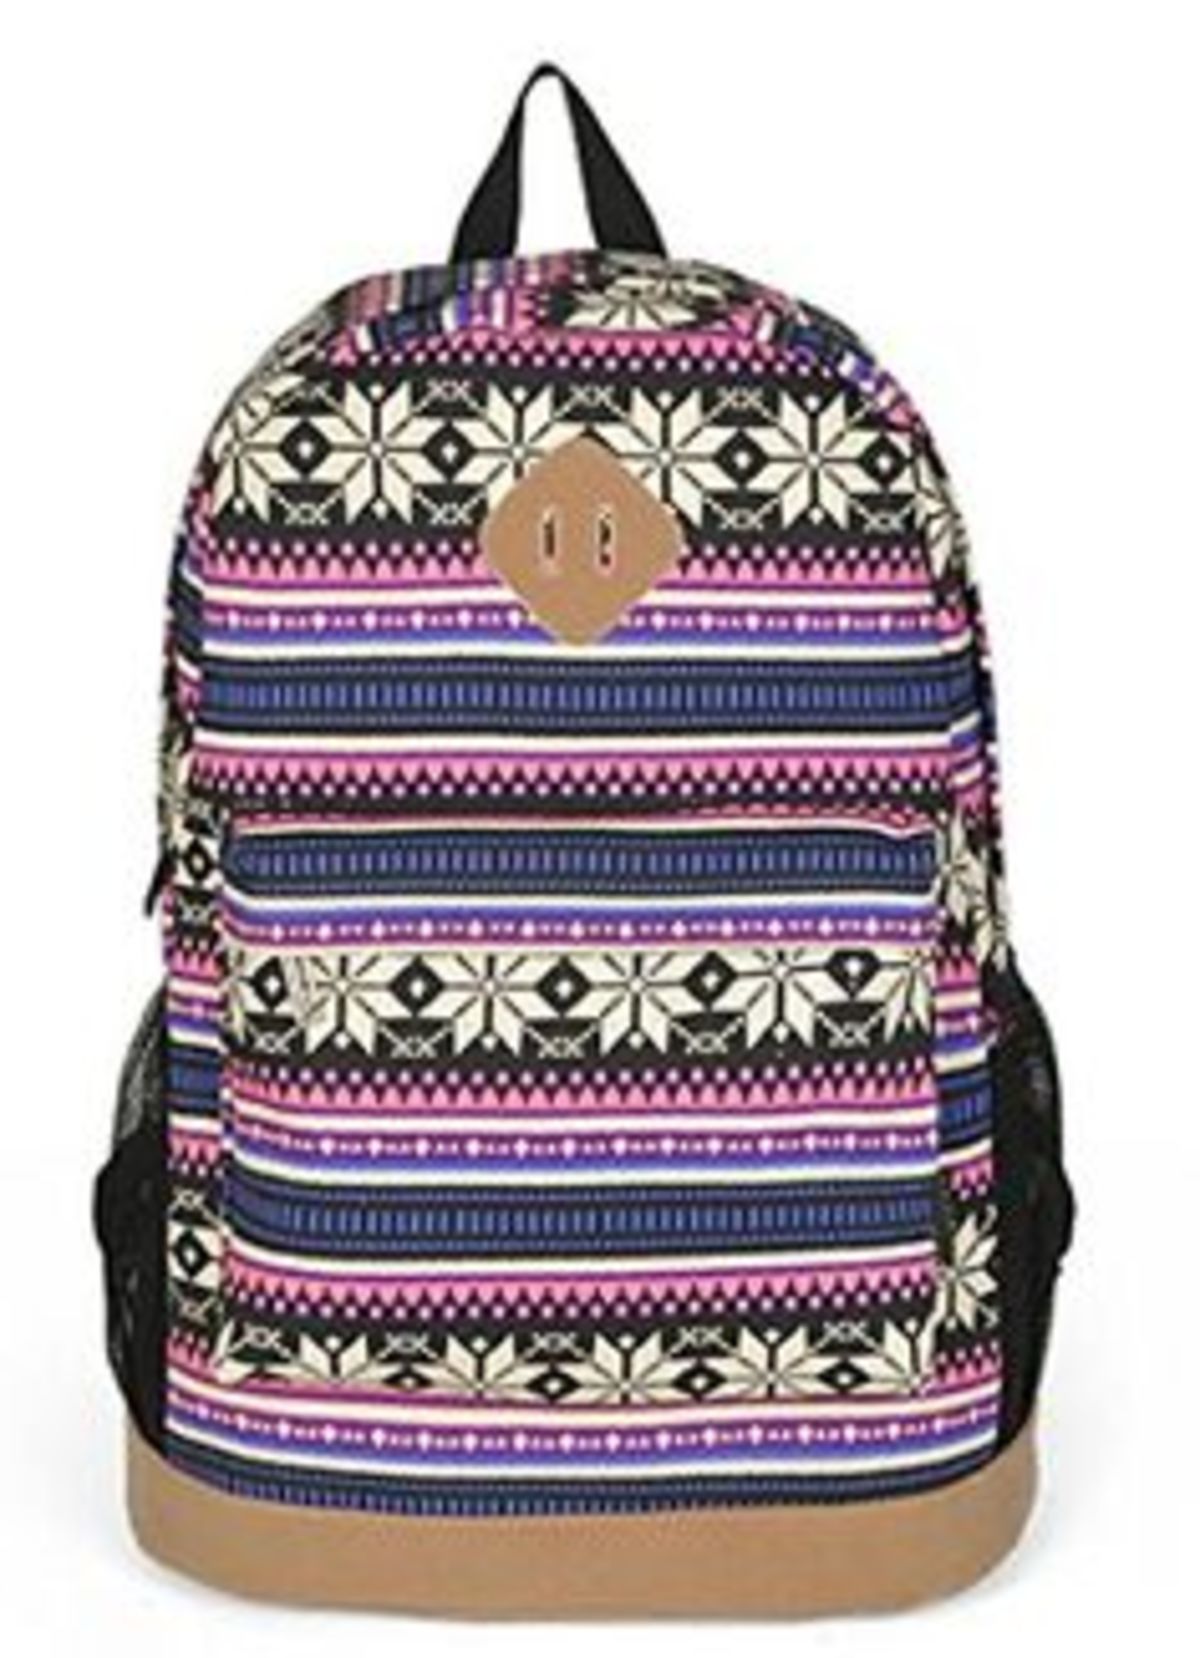 Best Stylish Backpacks For College Girls With A Laptop Compartment On Sale - Reviews And Ratings ...